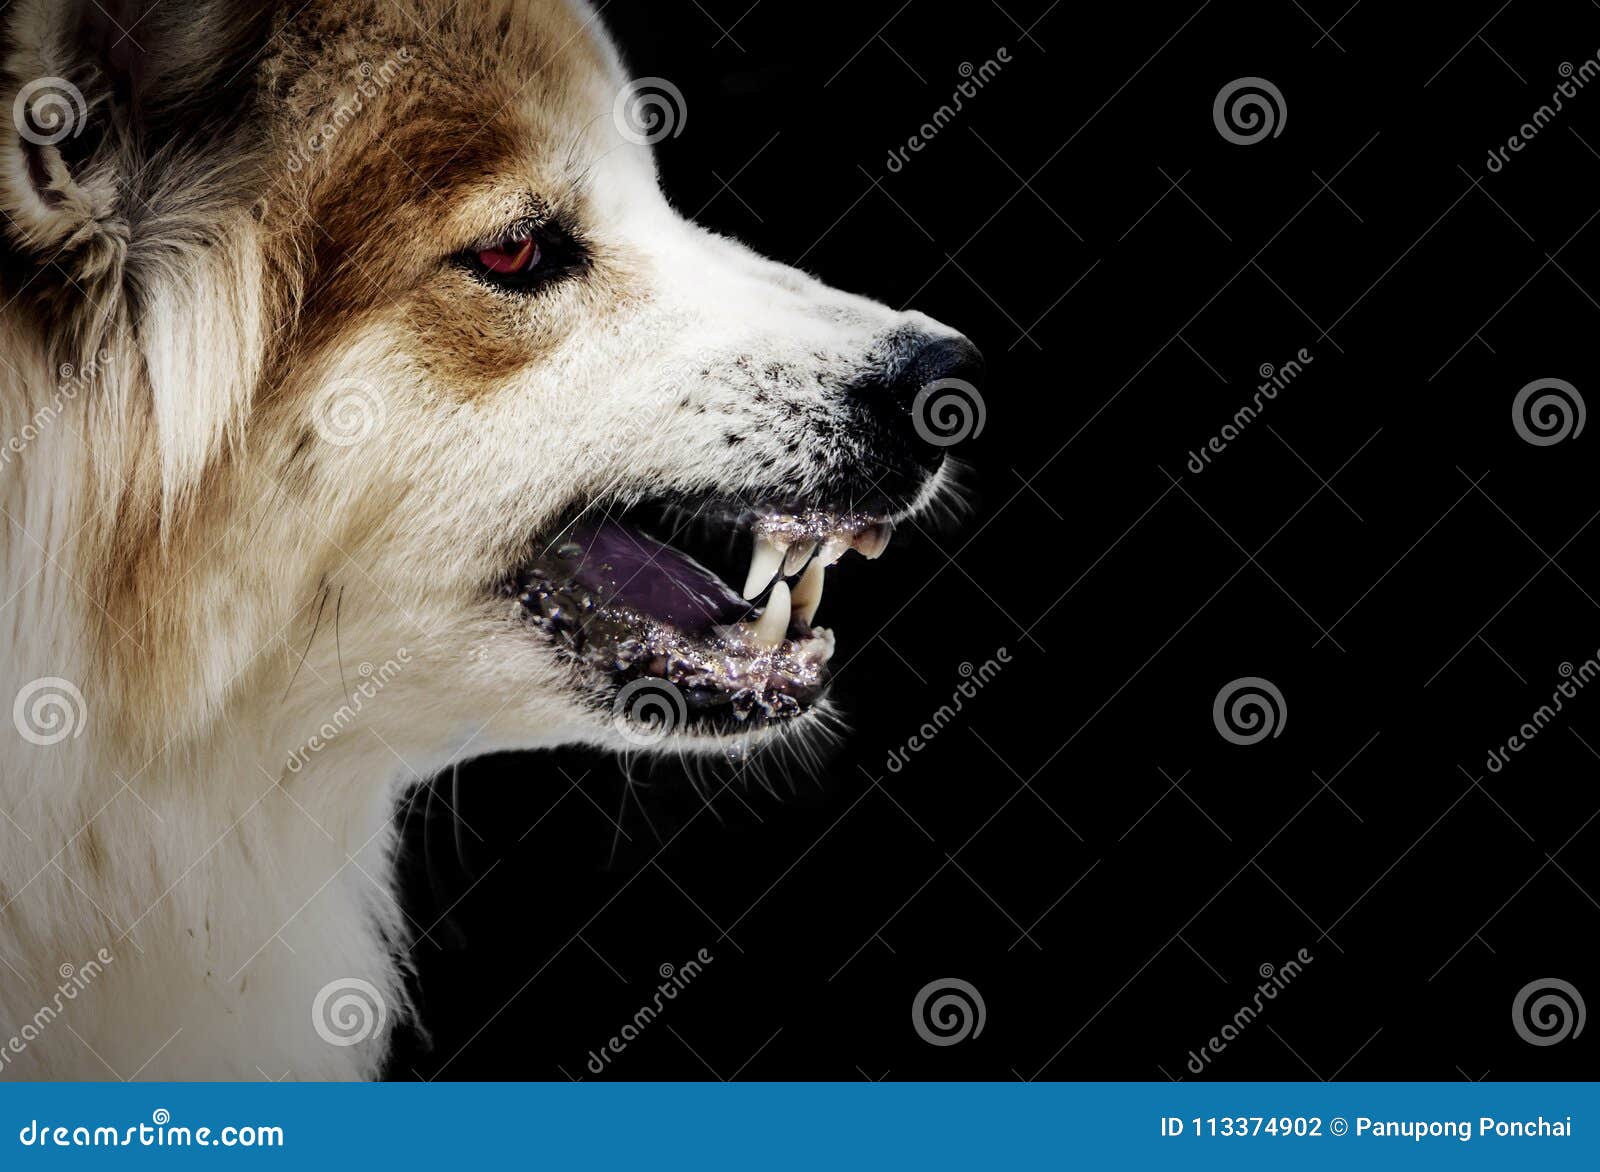 dog crazy threaten show fangs have drooling. is a symptom of rabies.